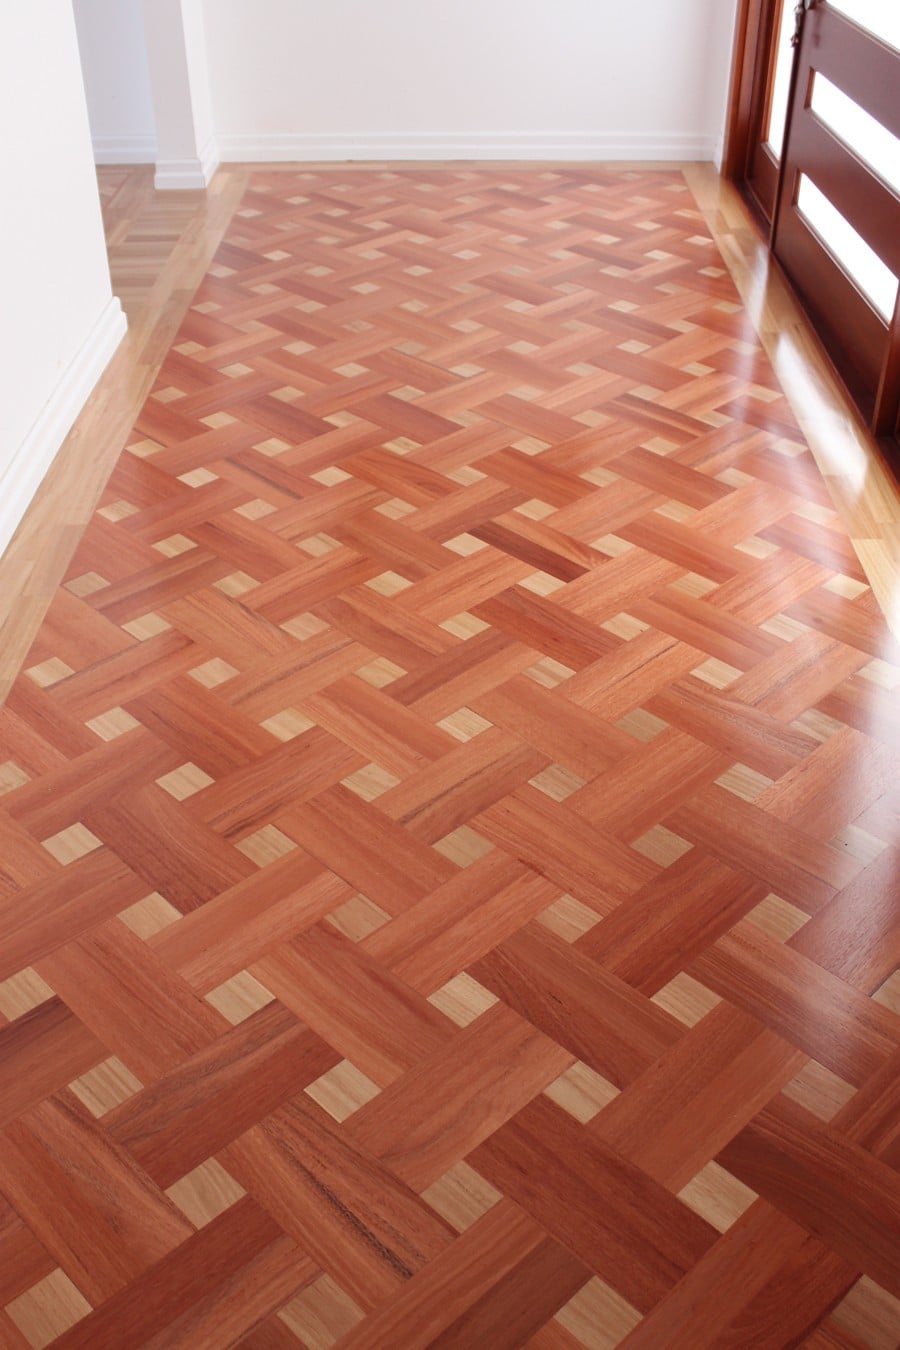 Sydney Blue Gum and Blackbutt block parquetry Benowa Waters Zealsea Timber Flooring Gold Coast Brisbane QLD Sydney Tweed Heads NSW Melbourne Vic Canberra ACT Adelaide SA